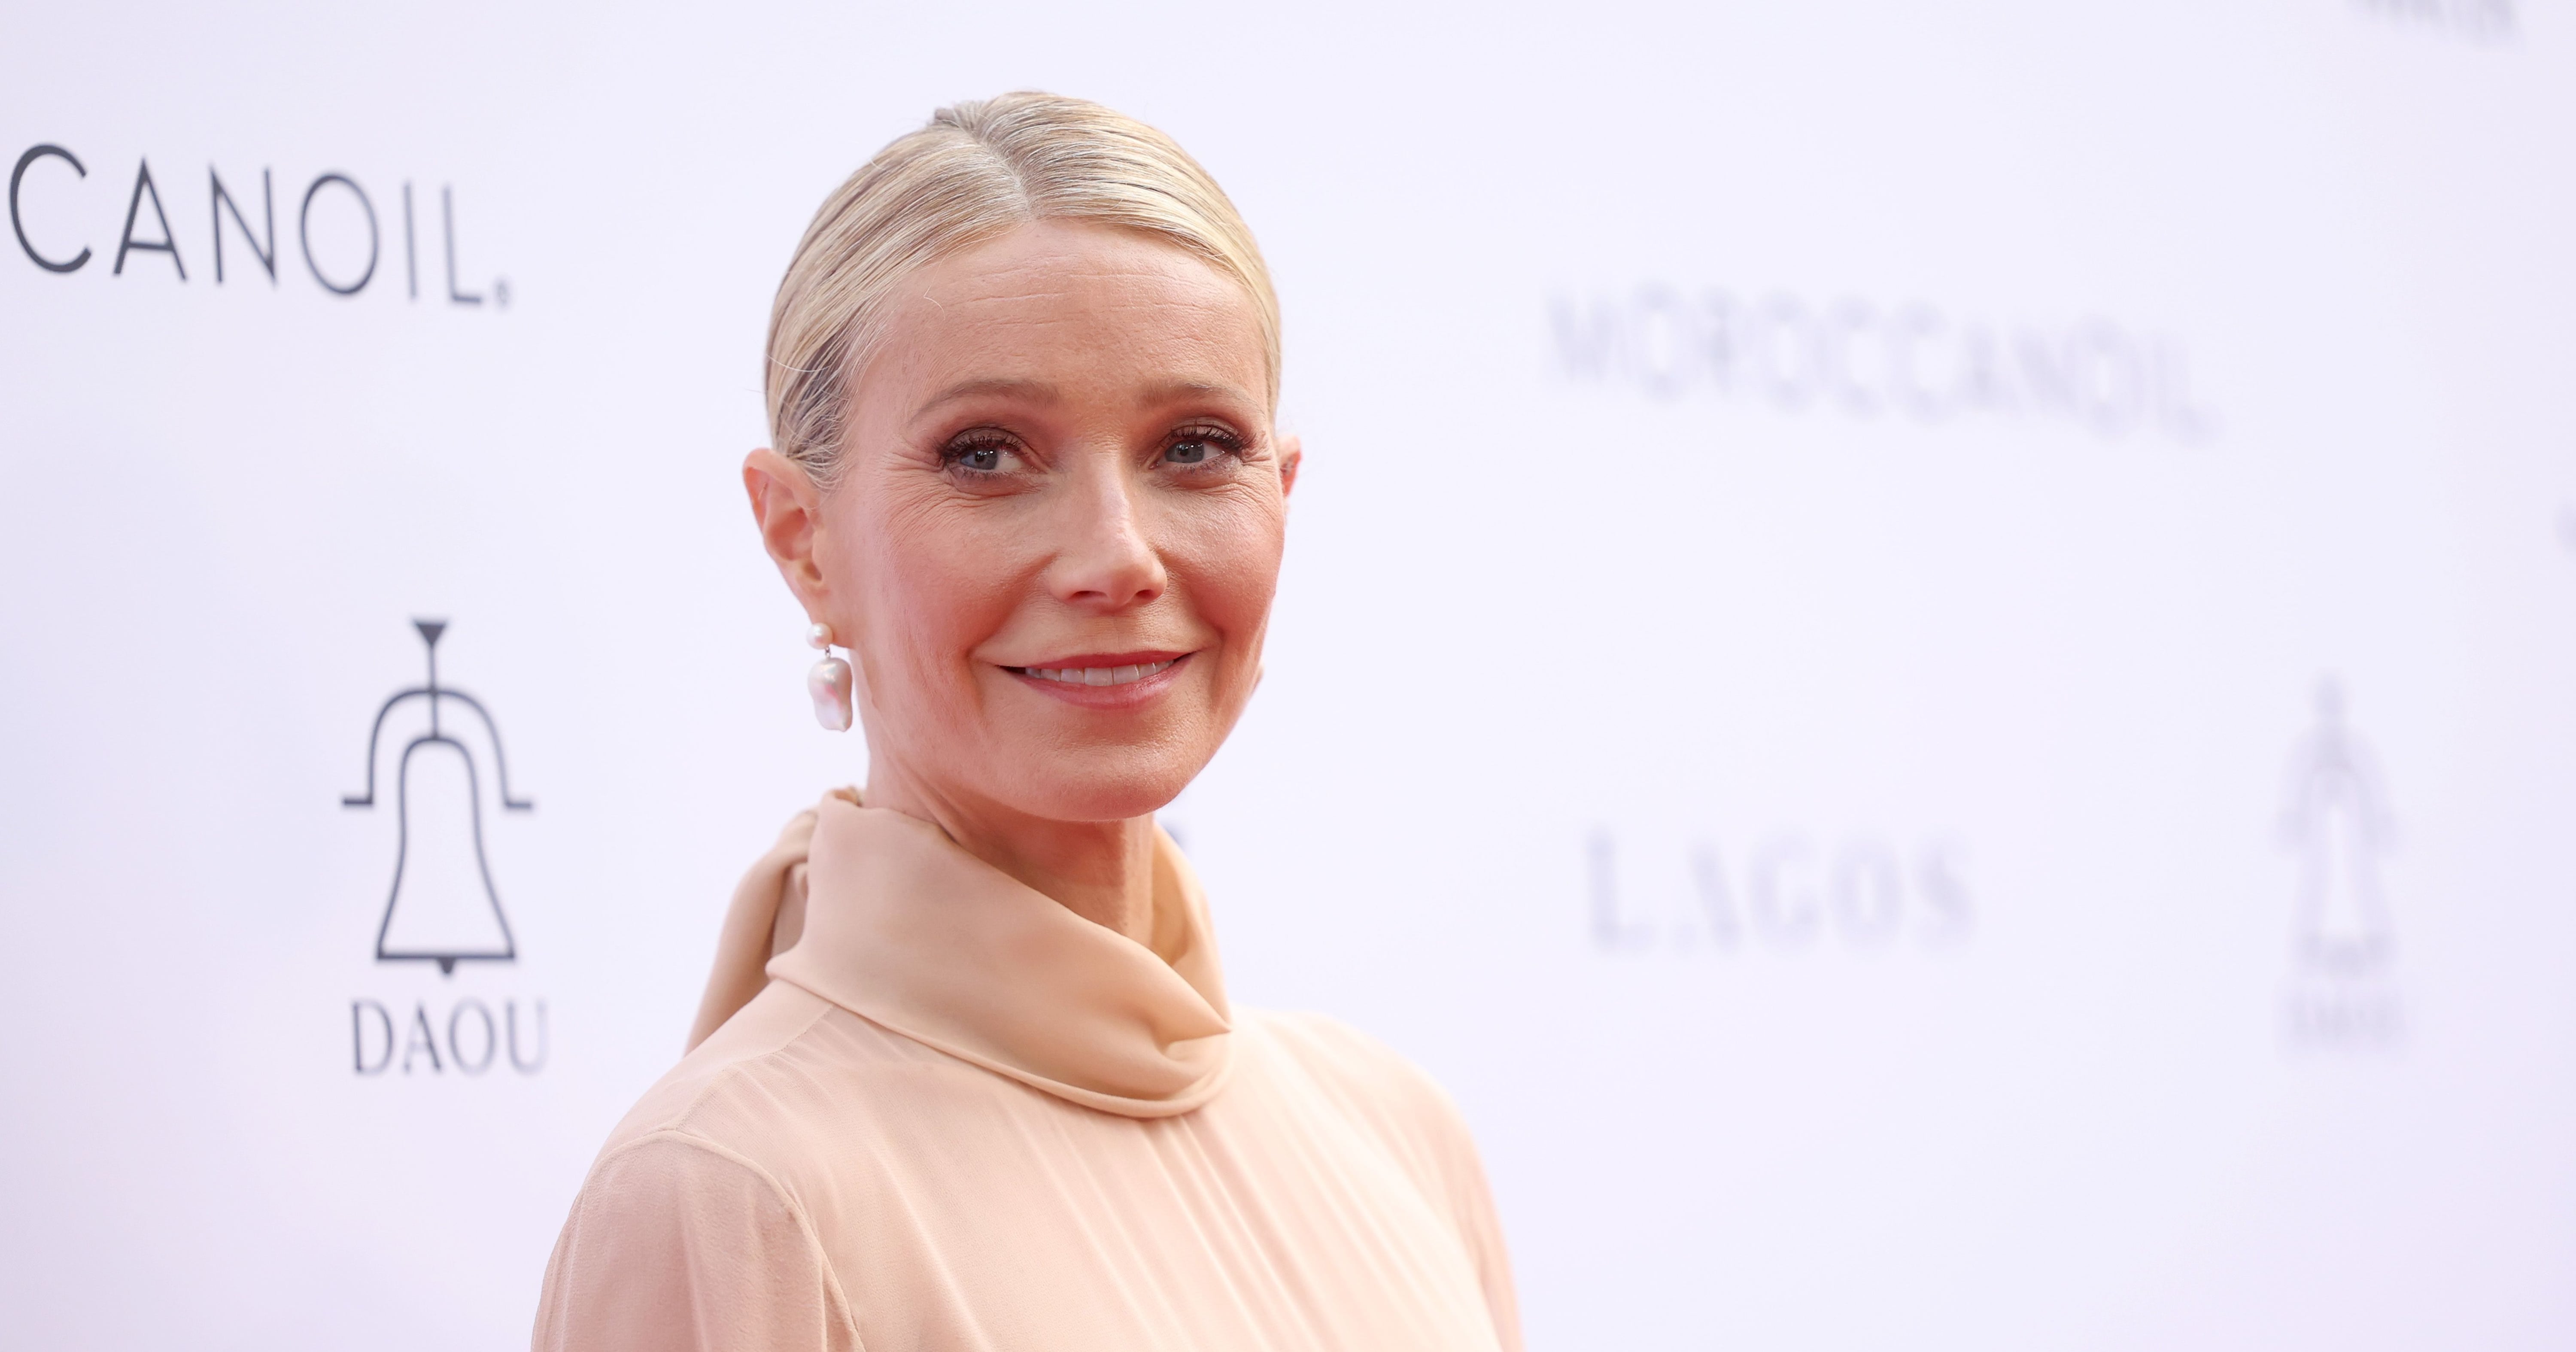 Gwyneth Paltrow Gets Real About Going Through Menopause: “Someone Help Me”